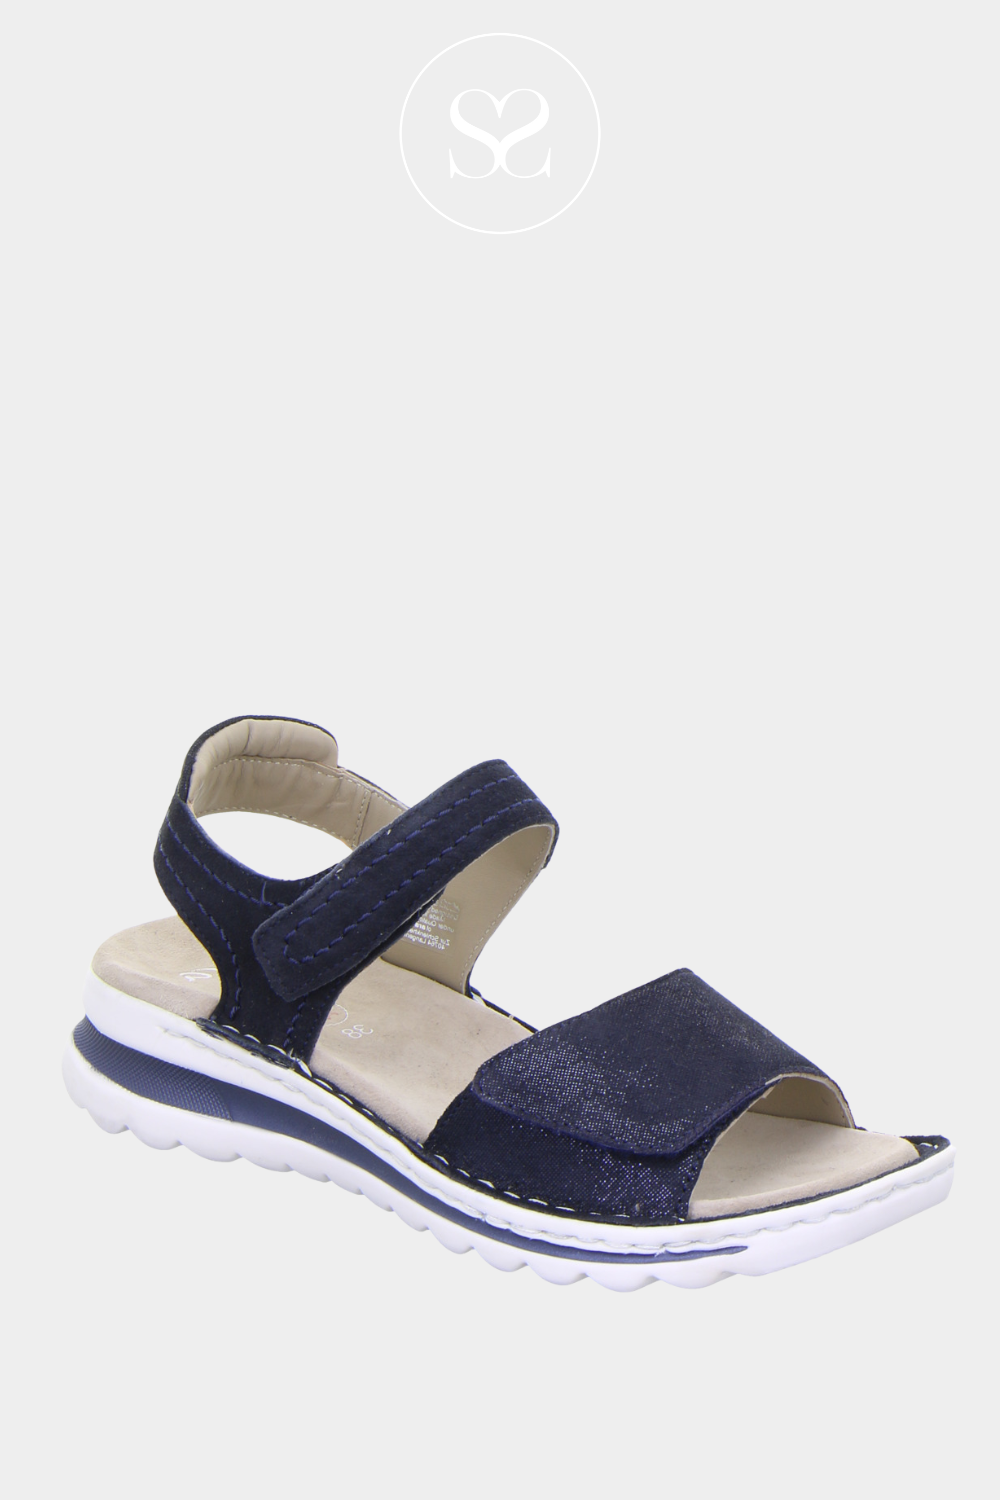 ARA 12-47207 NAVY LEATHER COMFORTABLE WALKING SANDALS WITH SLIGHT WEDGE ELEVATION AND VELCRO STRAPS